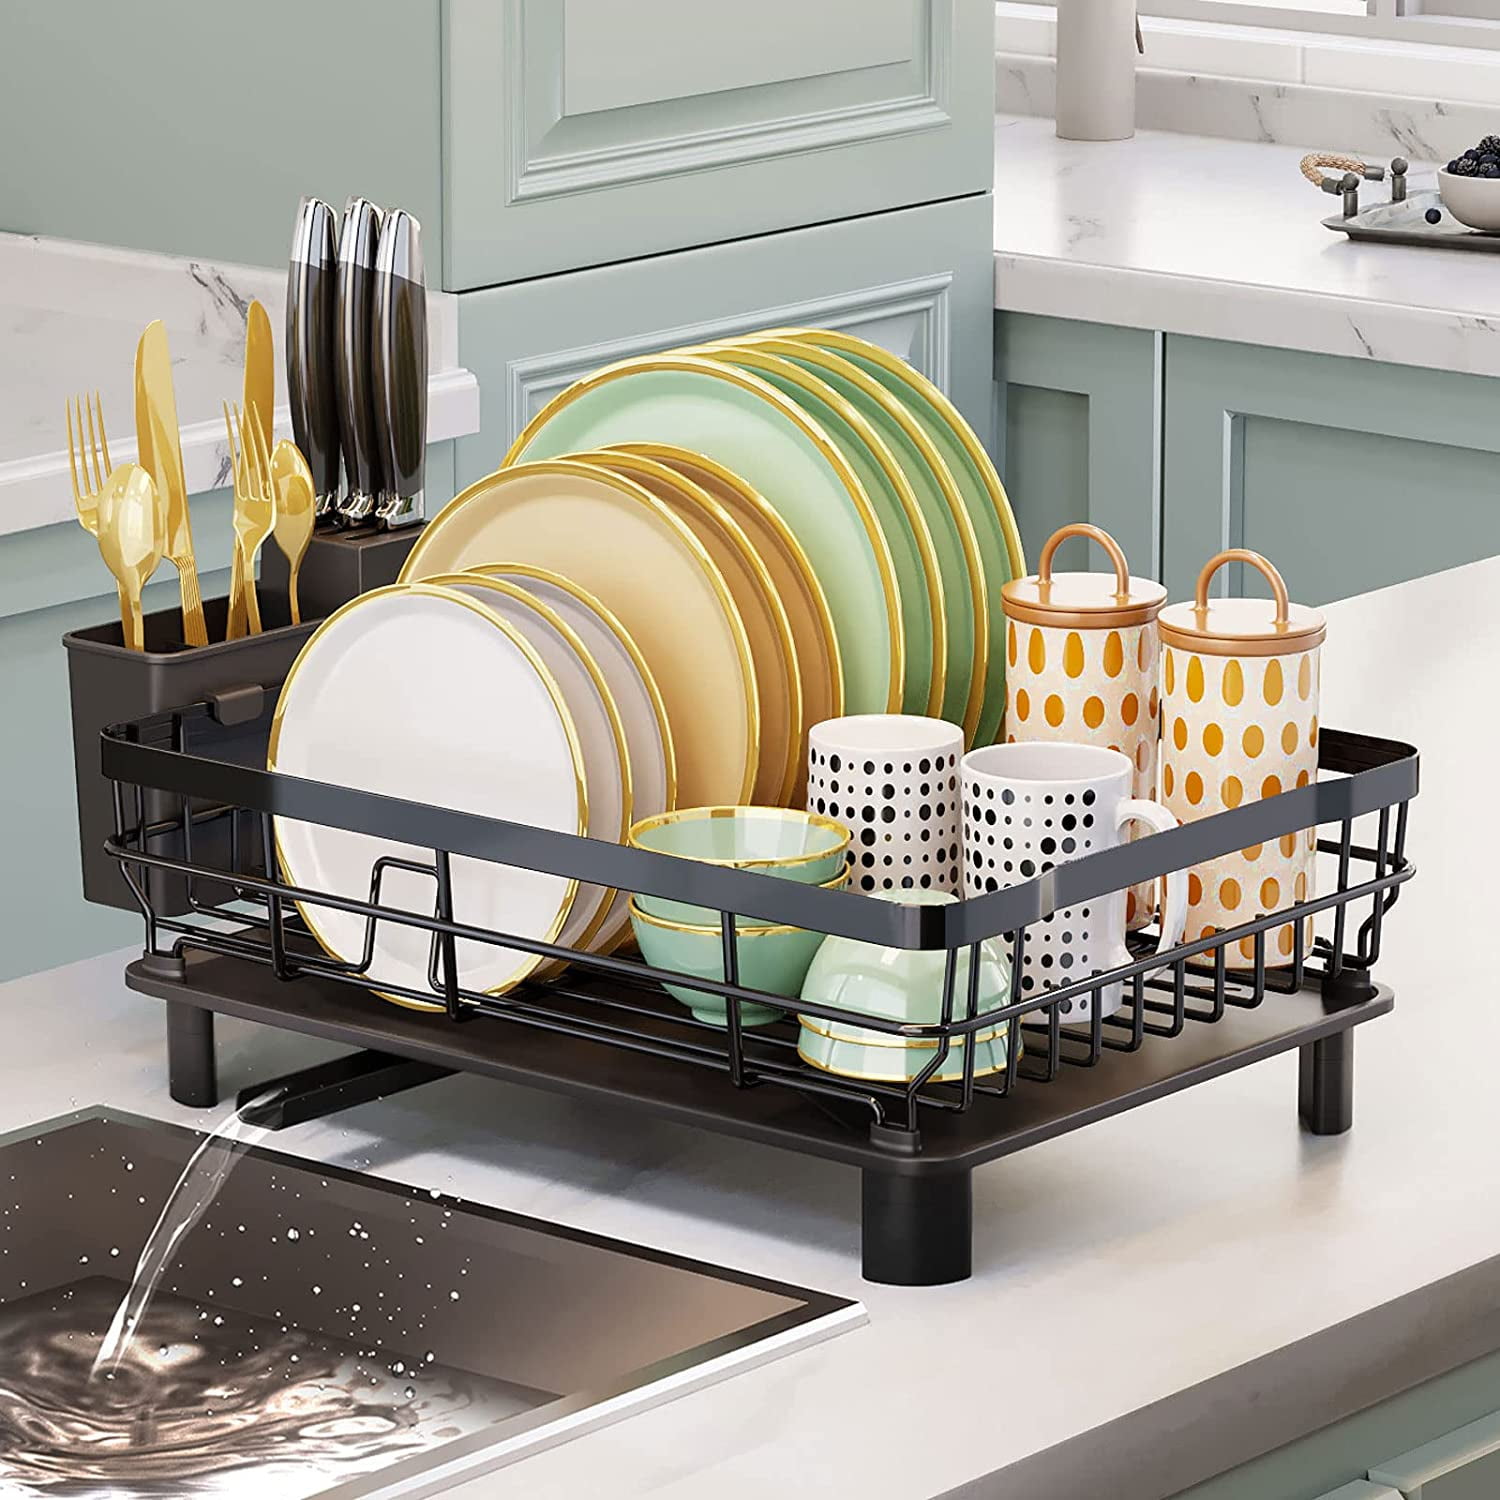 Dish Drying Rack with Drainboard Dish Drainers for Kitchen Counter